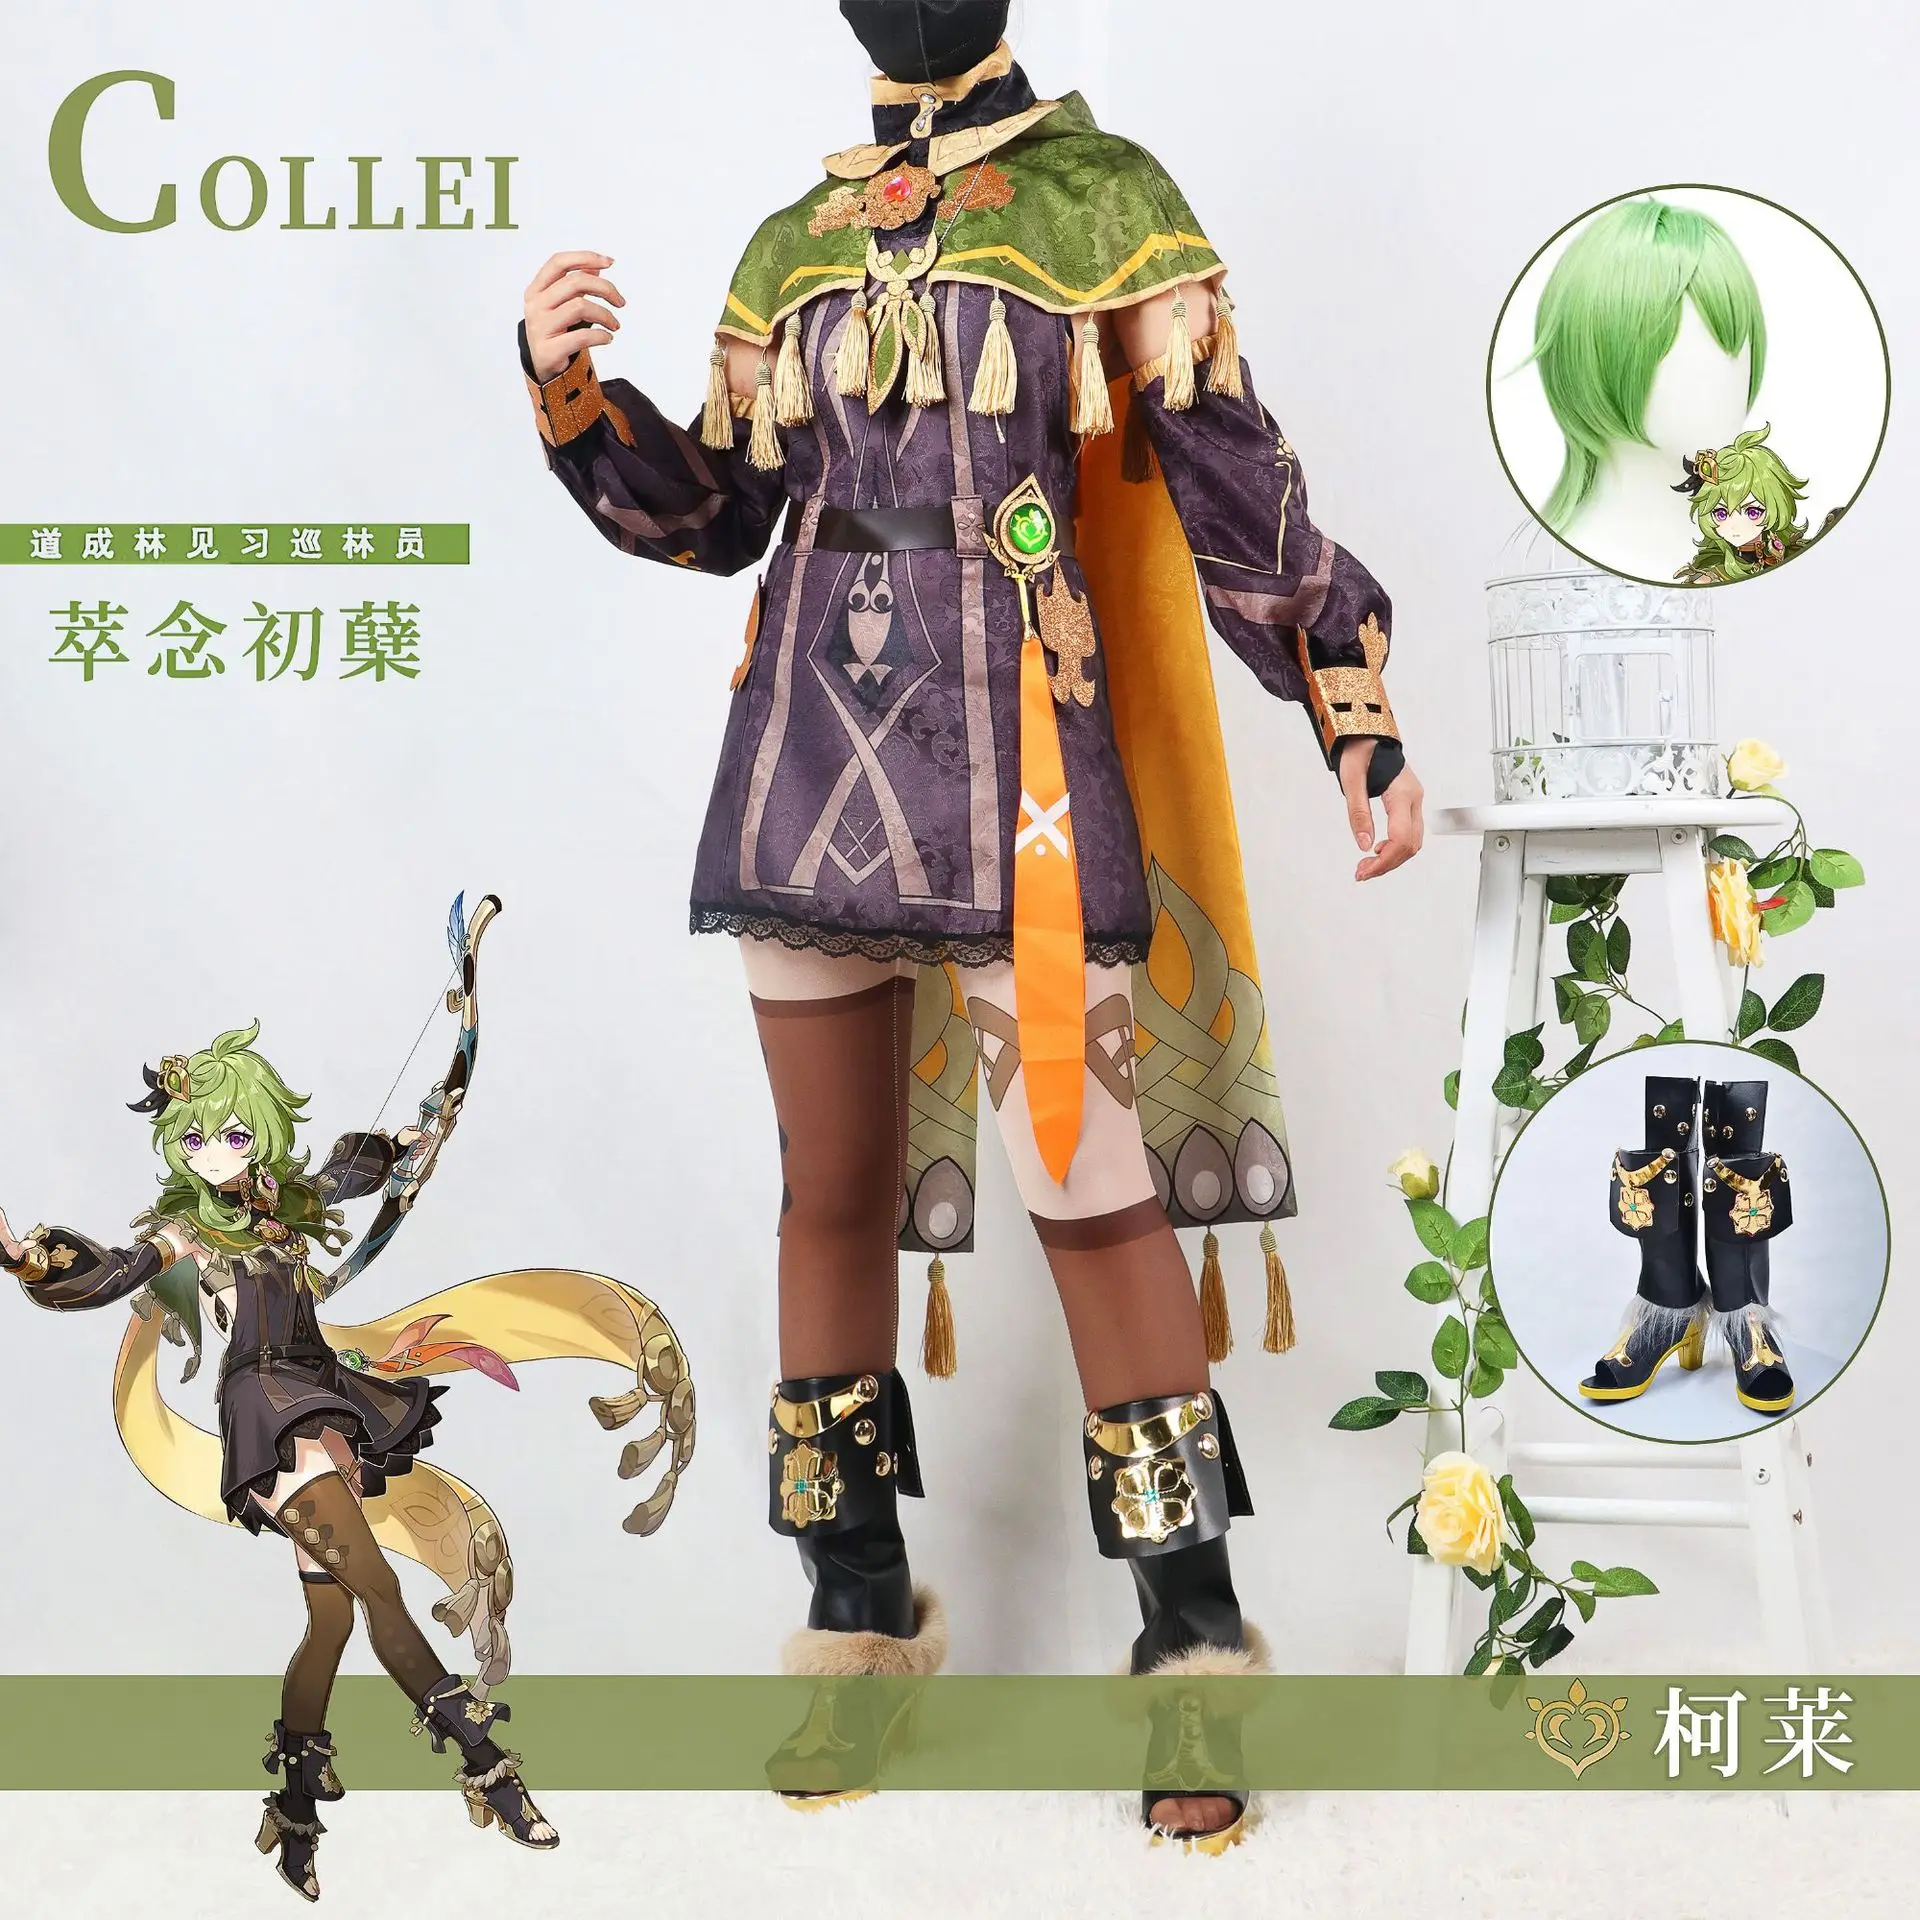 

Game Genshin Impact Collei Cosplay Costume Sumeru Dendro Avidya Forest Ranger Trainee Collei Outfits Dress Socks Wig For Comic